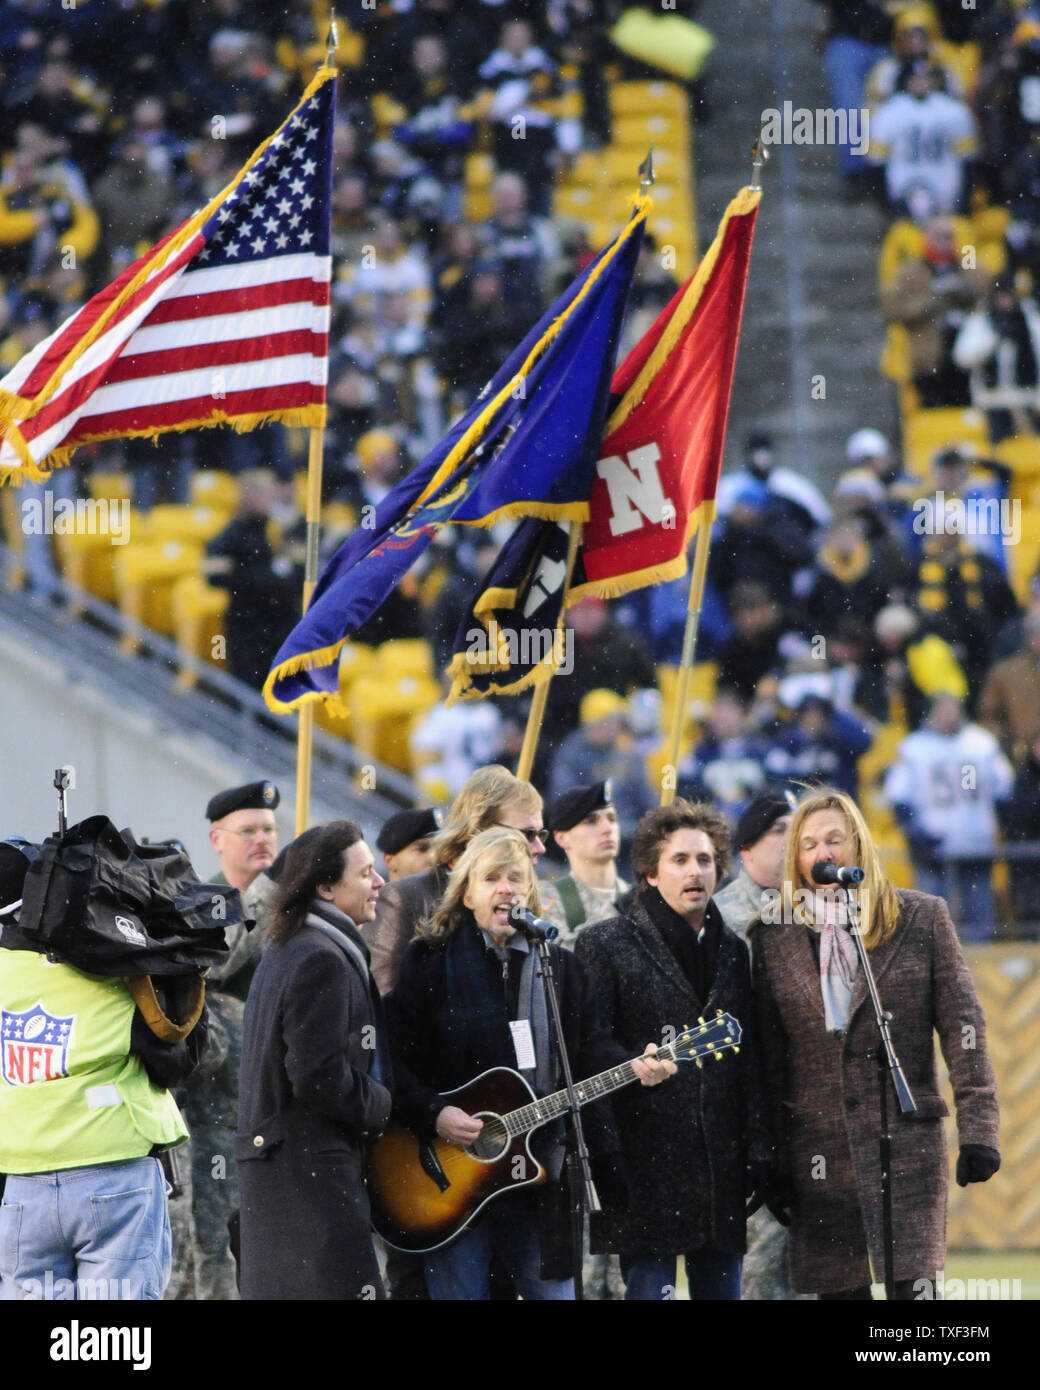 The rock band Styx performs the National Anthem before the AFC divisional playoff game between Pittsburgh Steelers and the San Diego Chargers at Heinz Field on January 11, 2009 in Pittsburgh, Pennsylvania.     (UPI Photo/Archie Carpenter) Stock Photo